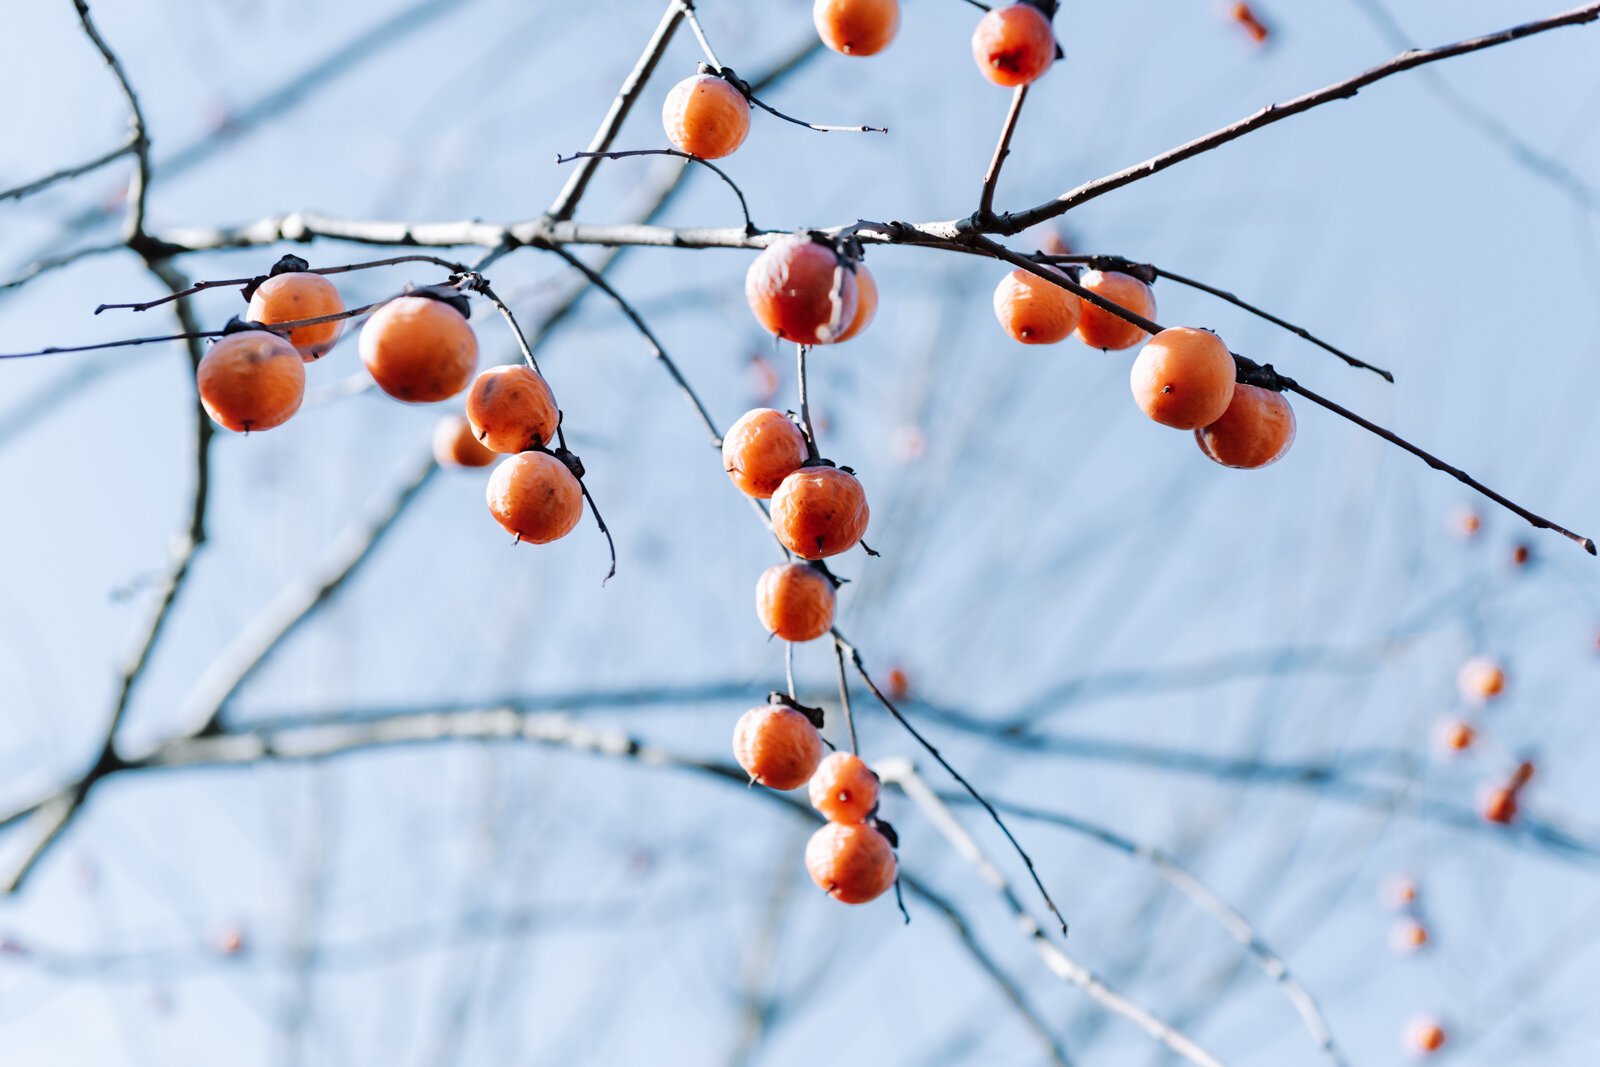 Persimmon, an edible fruit, on the trees on Miami tribal property in Fort Wayne.